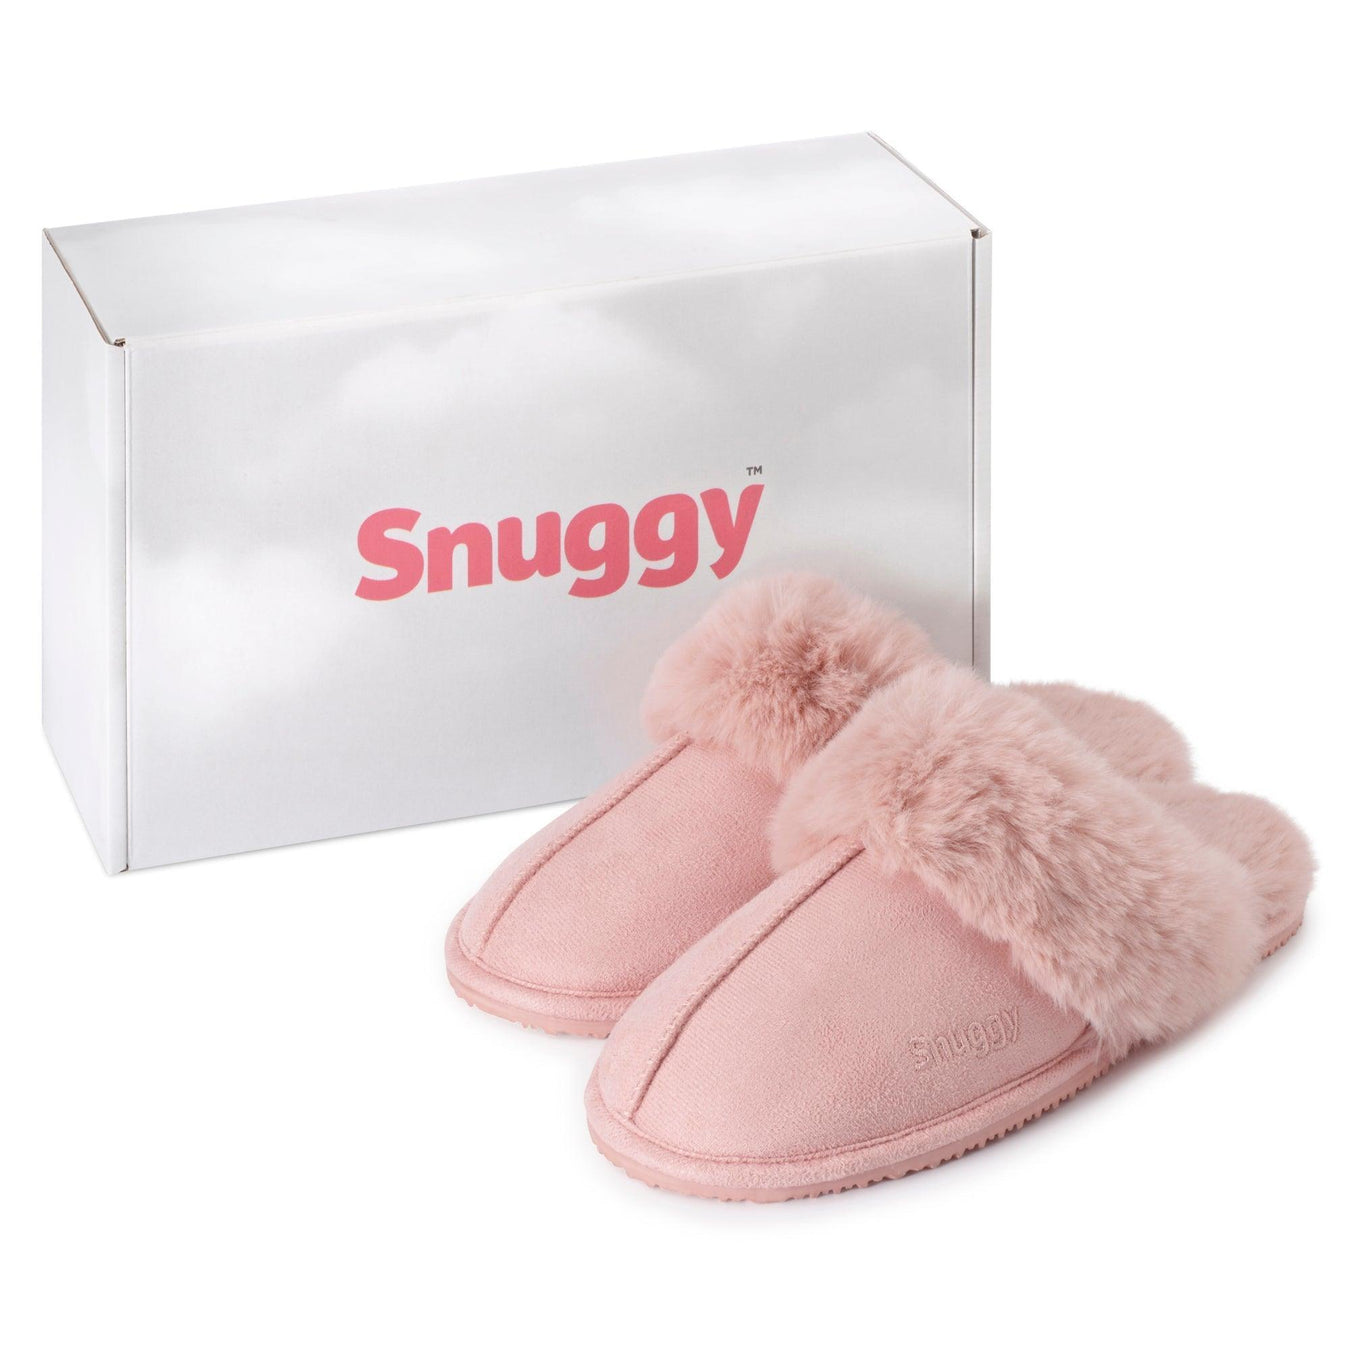 Snuggy Fluffy Slippers